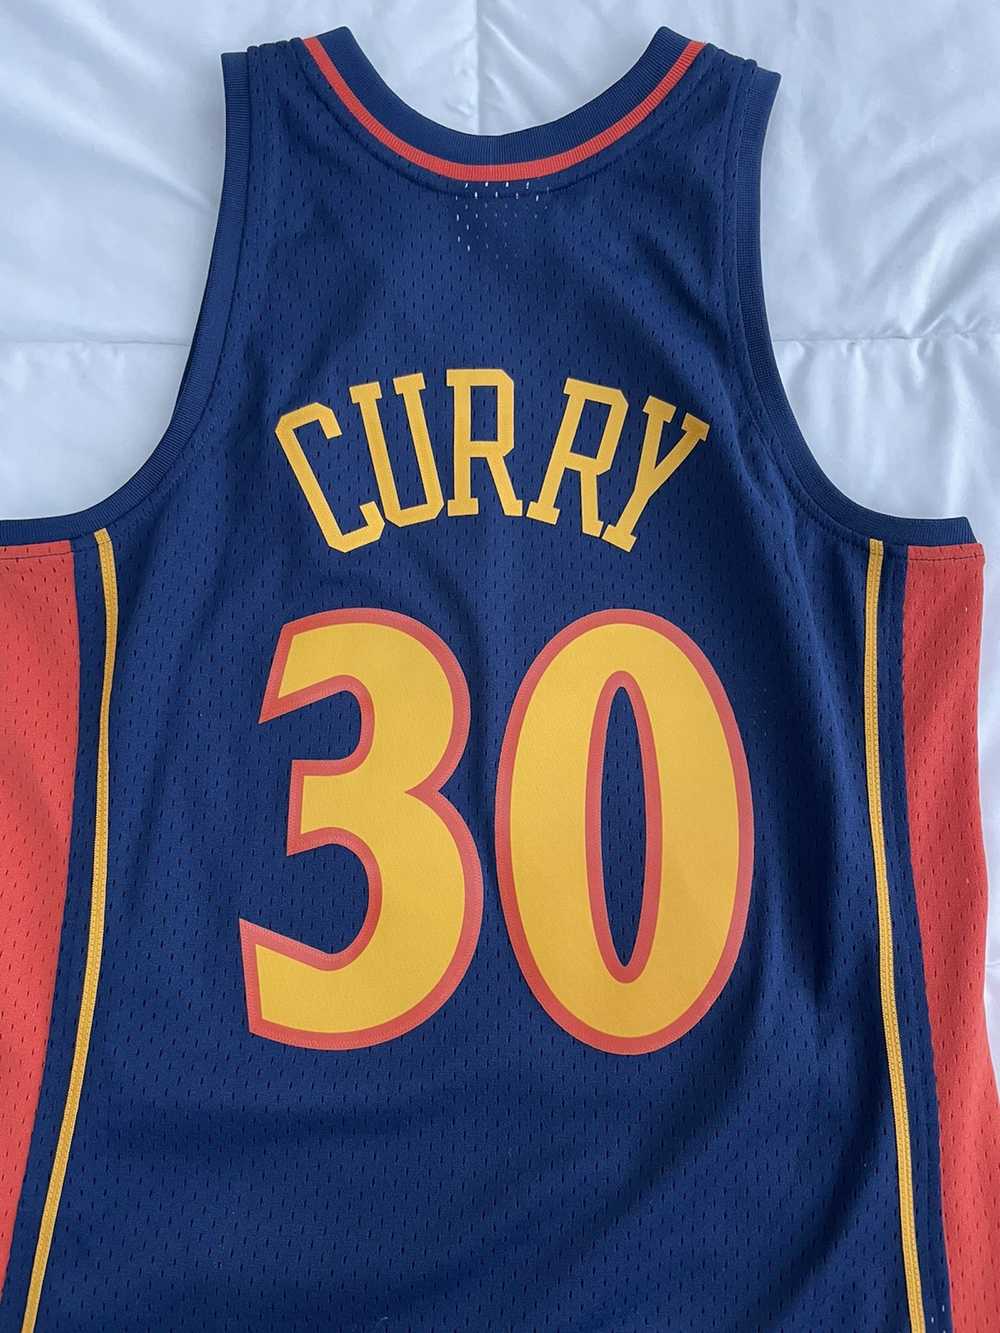 NBA Gold state warriors “ curry “ - image 2